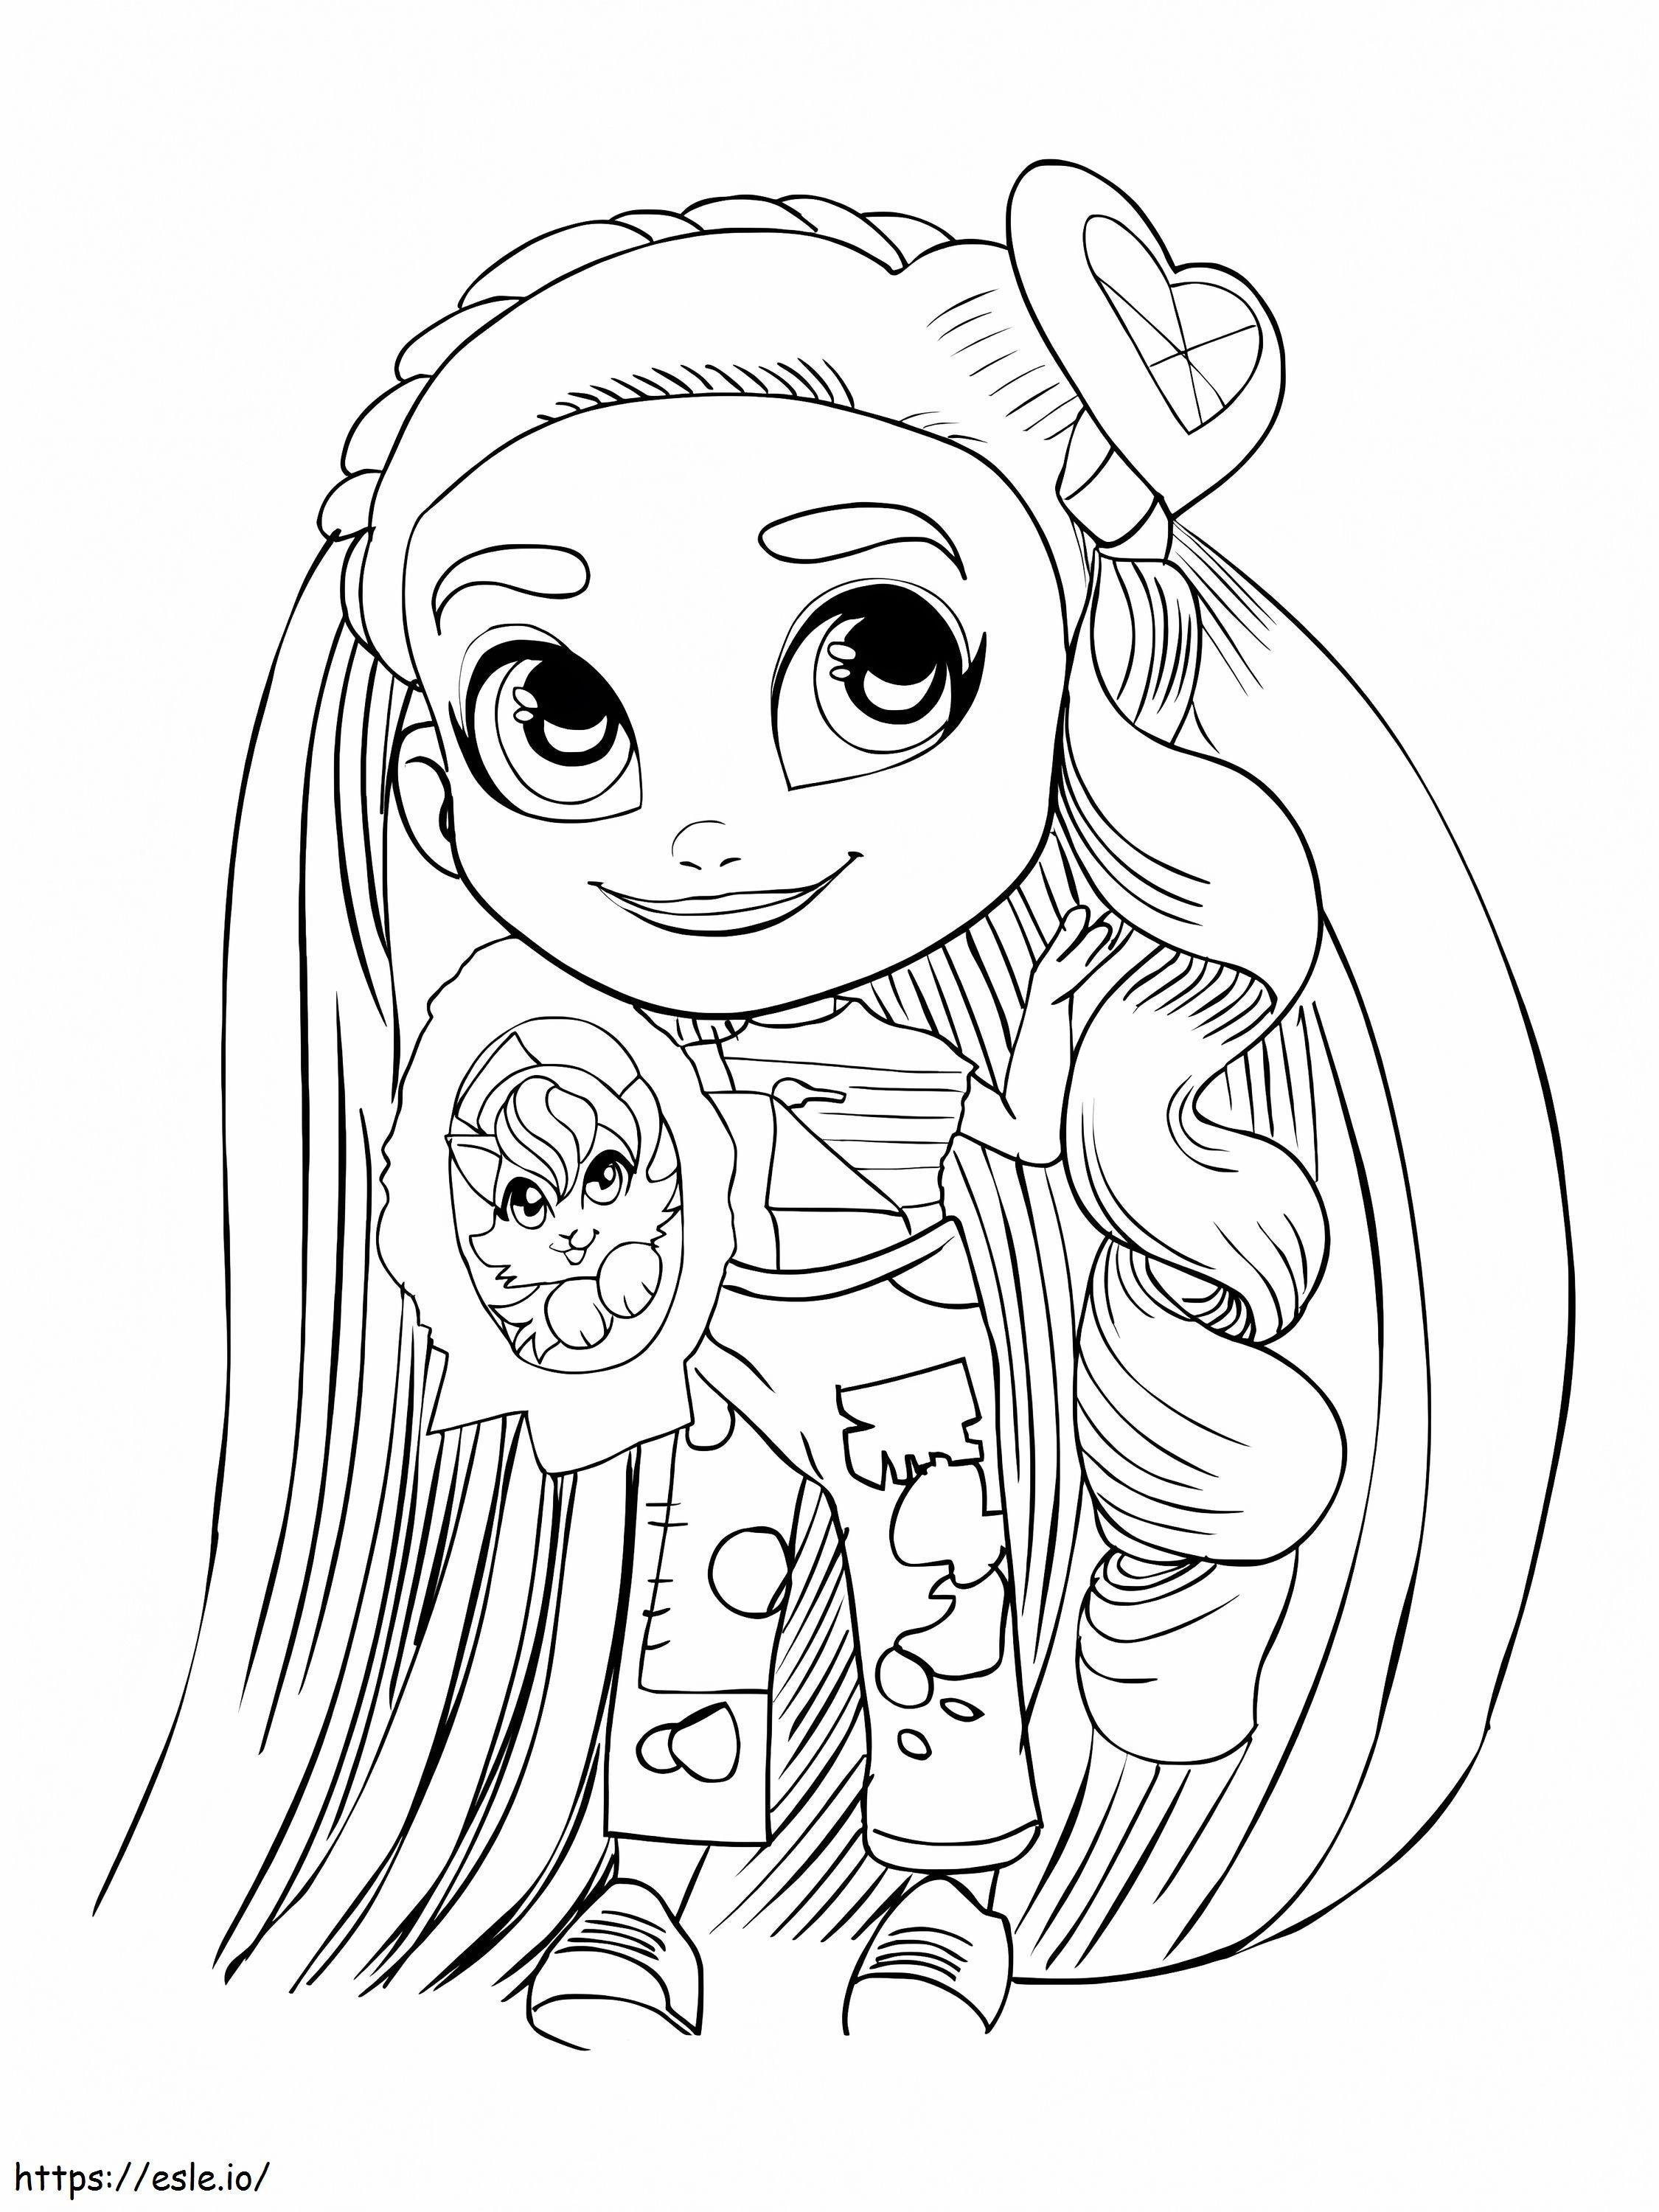 Hairdorables 3 coloring page